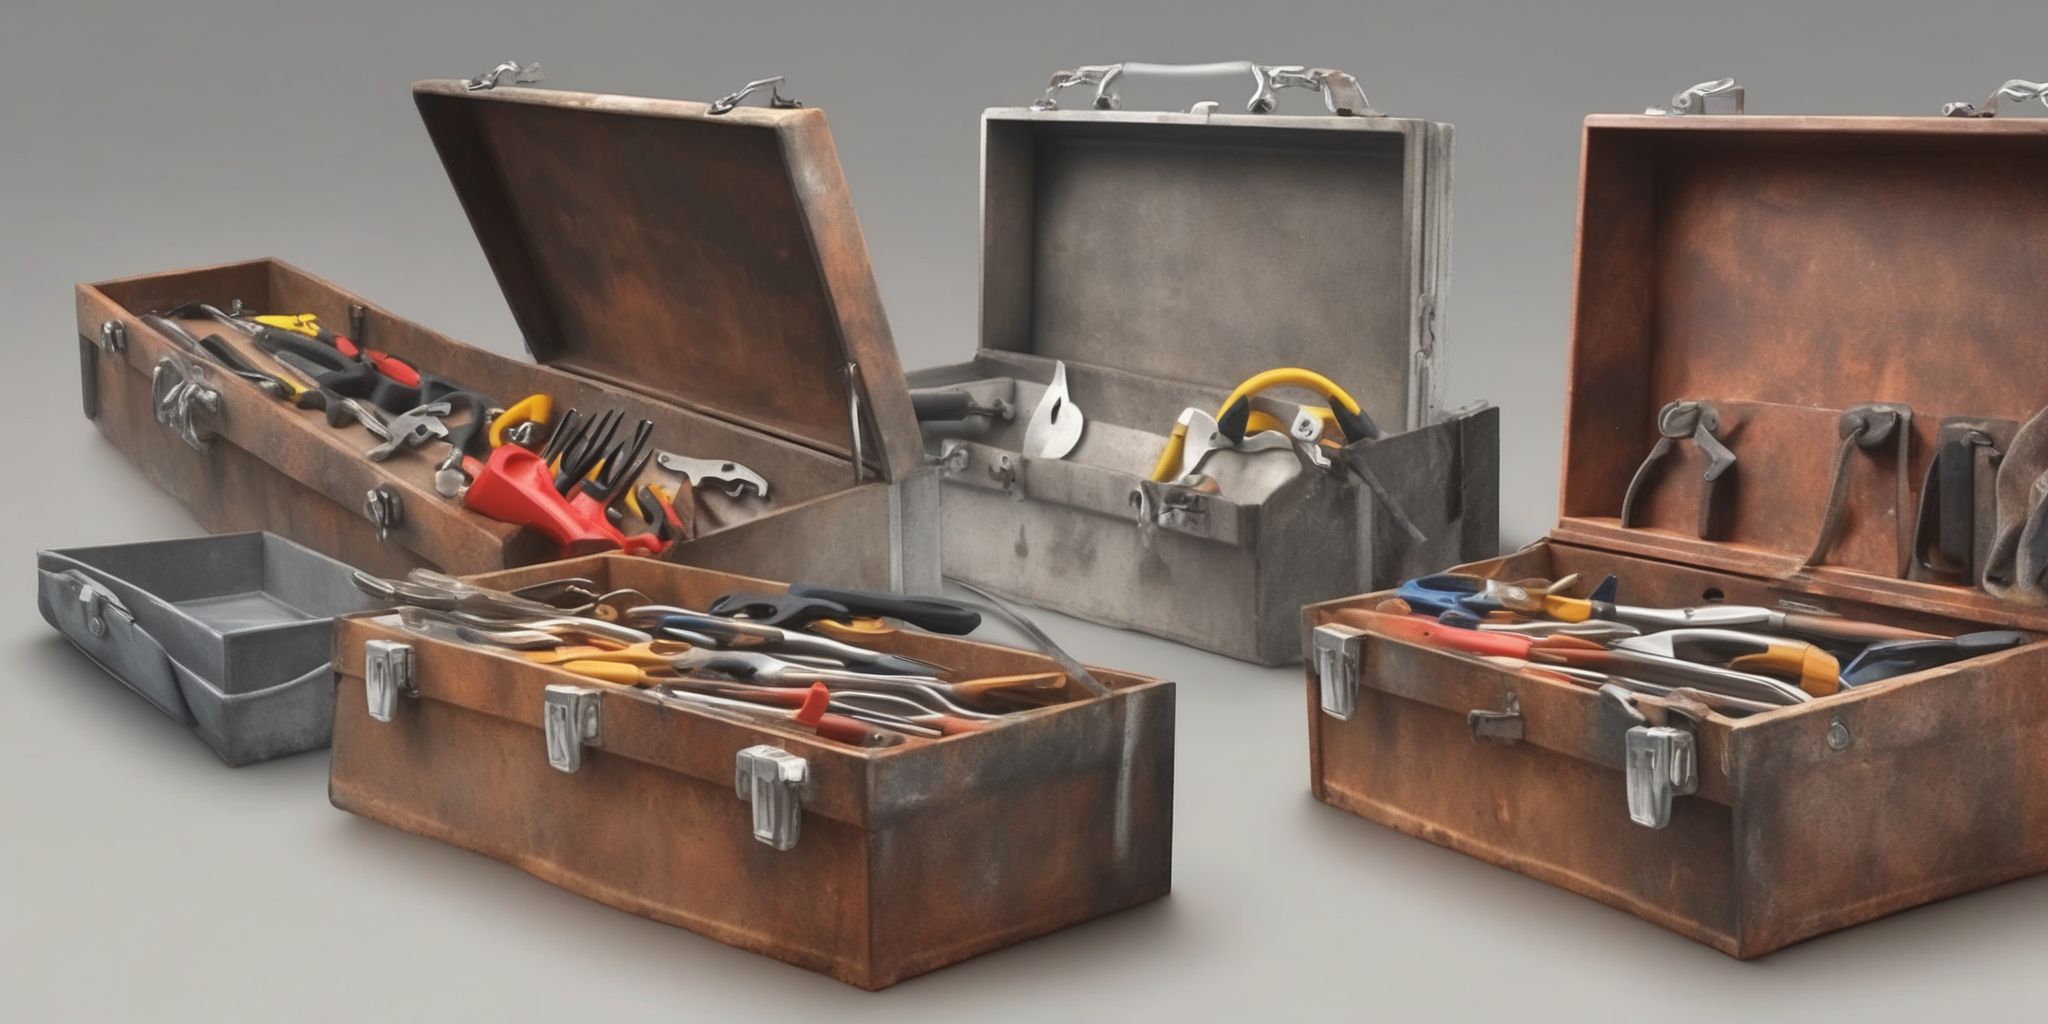 Toolbox  in realistic, photographic style